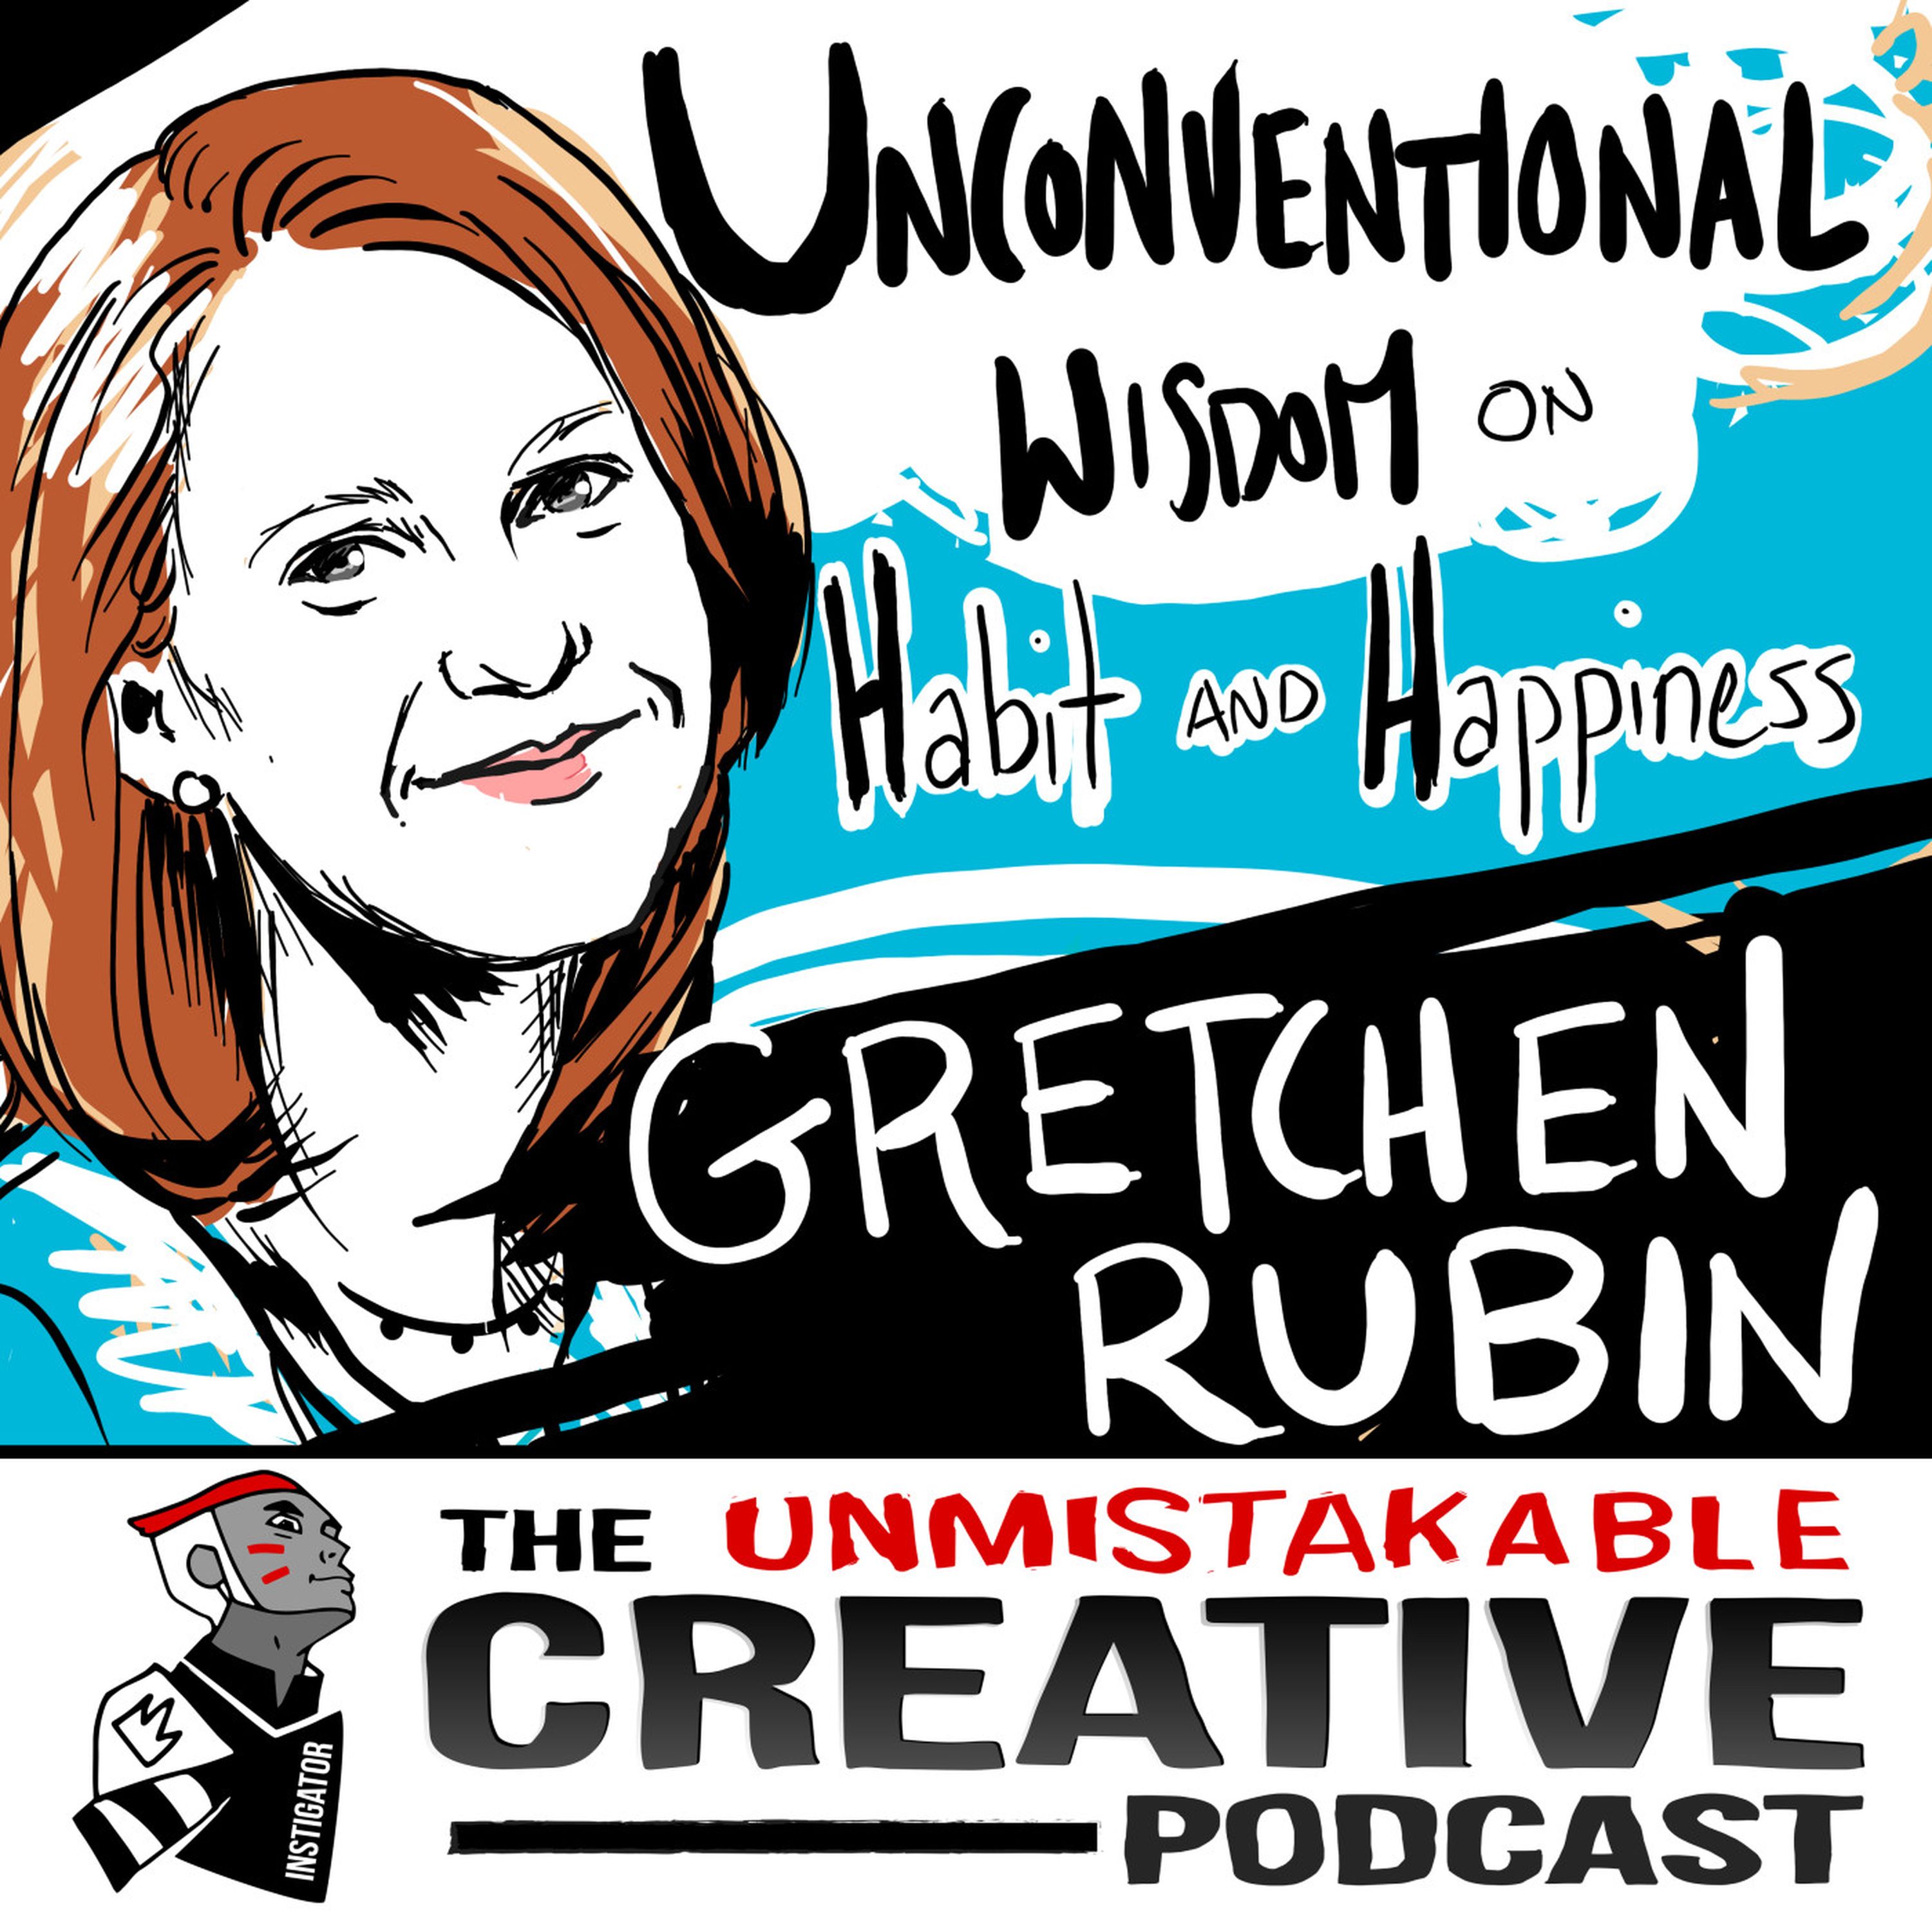 Best of: Unconventional Wisdom on Habits and Happiness with Gretchen Rubin